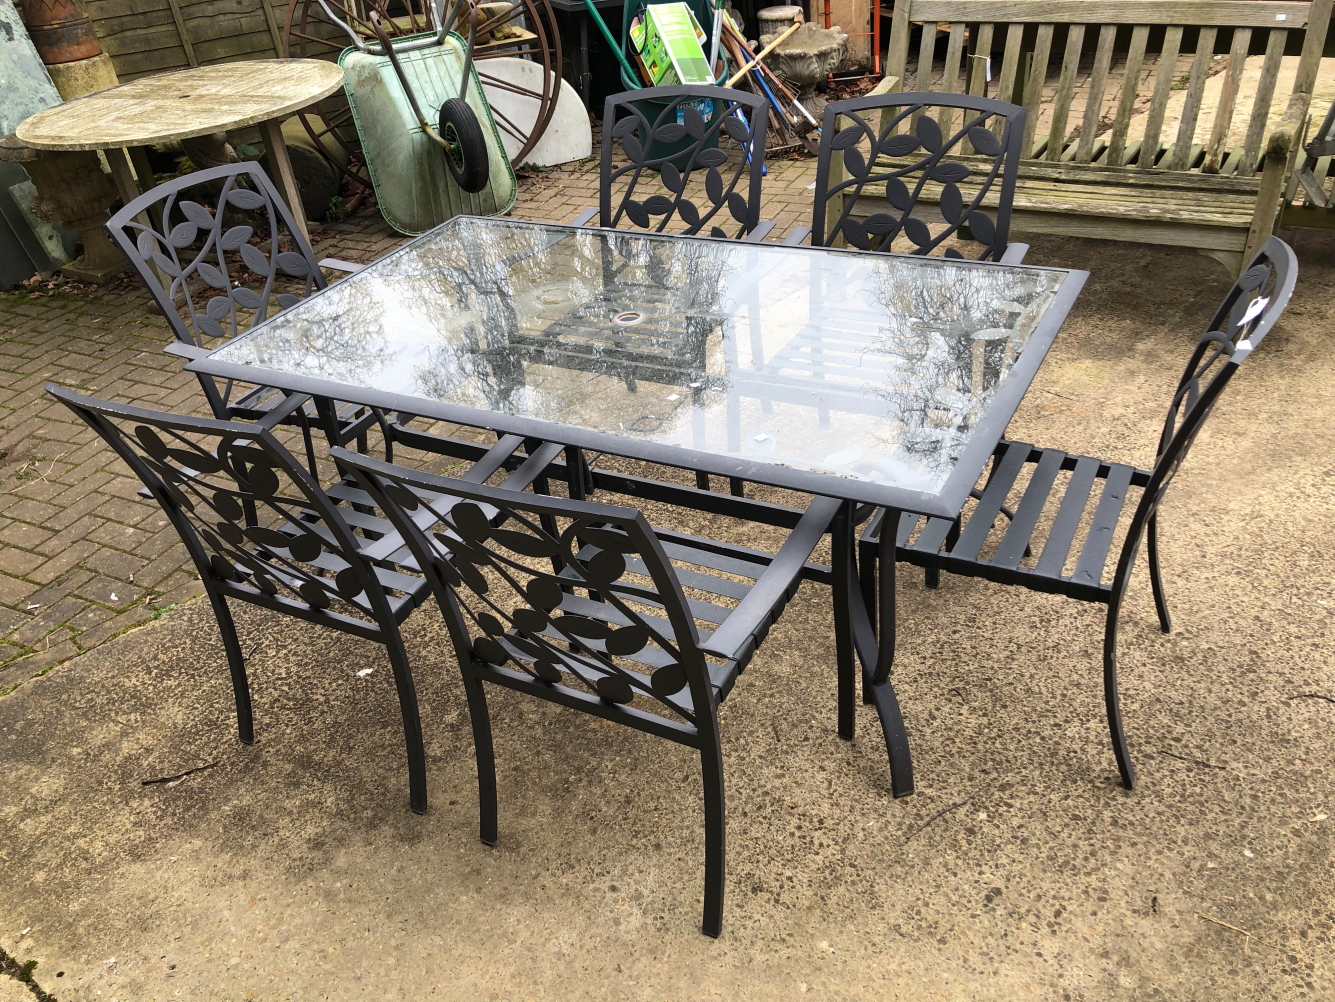 A GLASS AND METAL GARDEN TABLE WITH SIX MATCHING CHAIRS